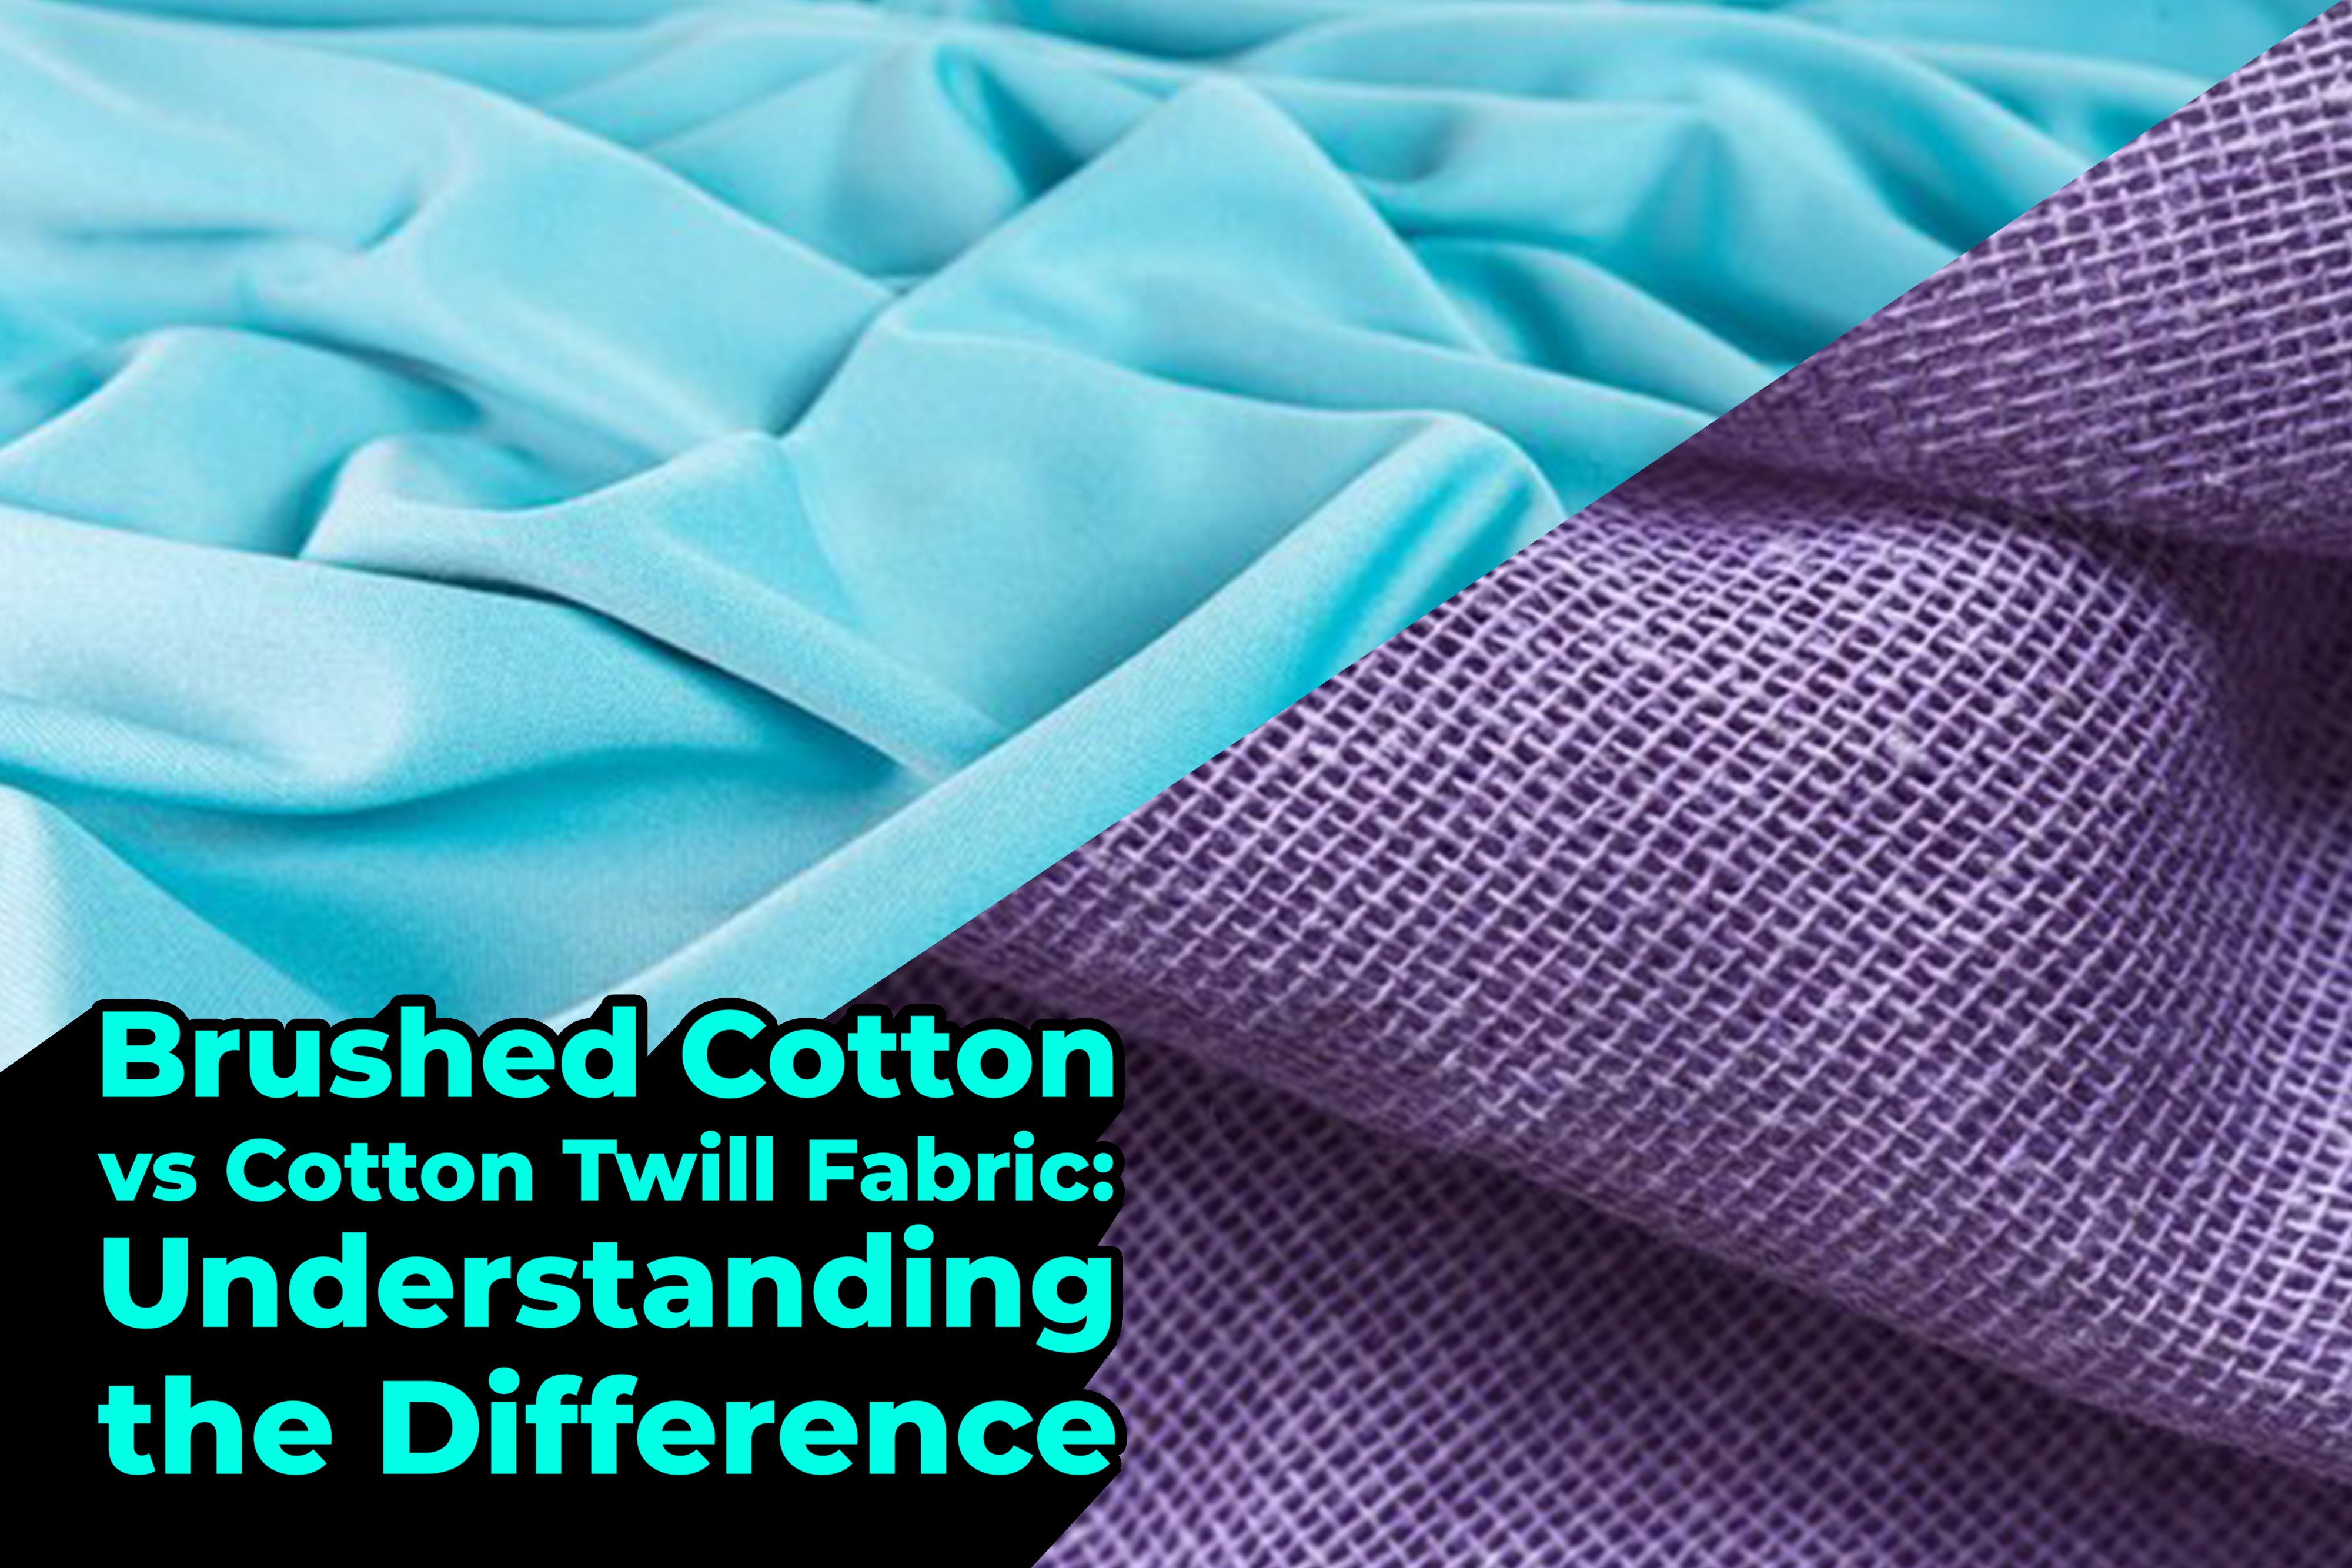 Brushed Cotton vs Cotton Twill Fabric: Understanding the